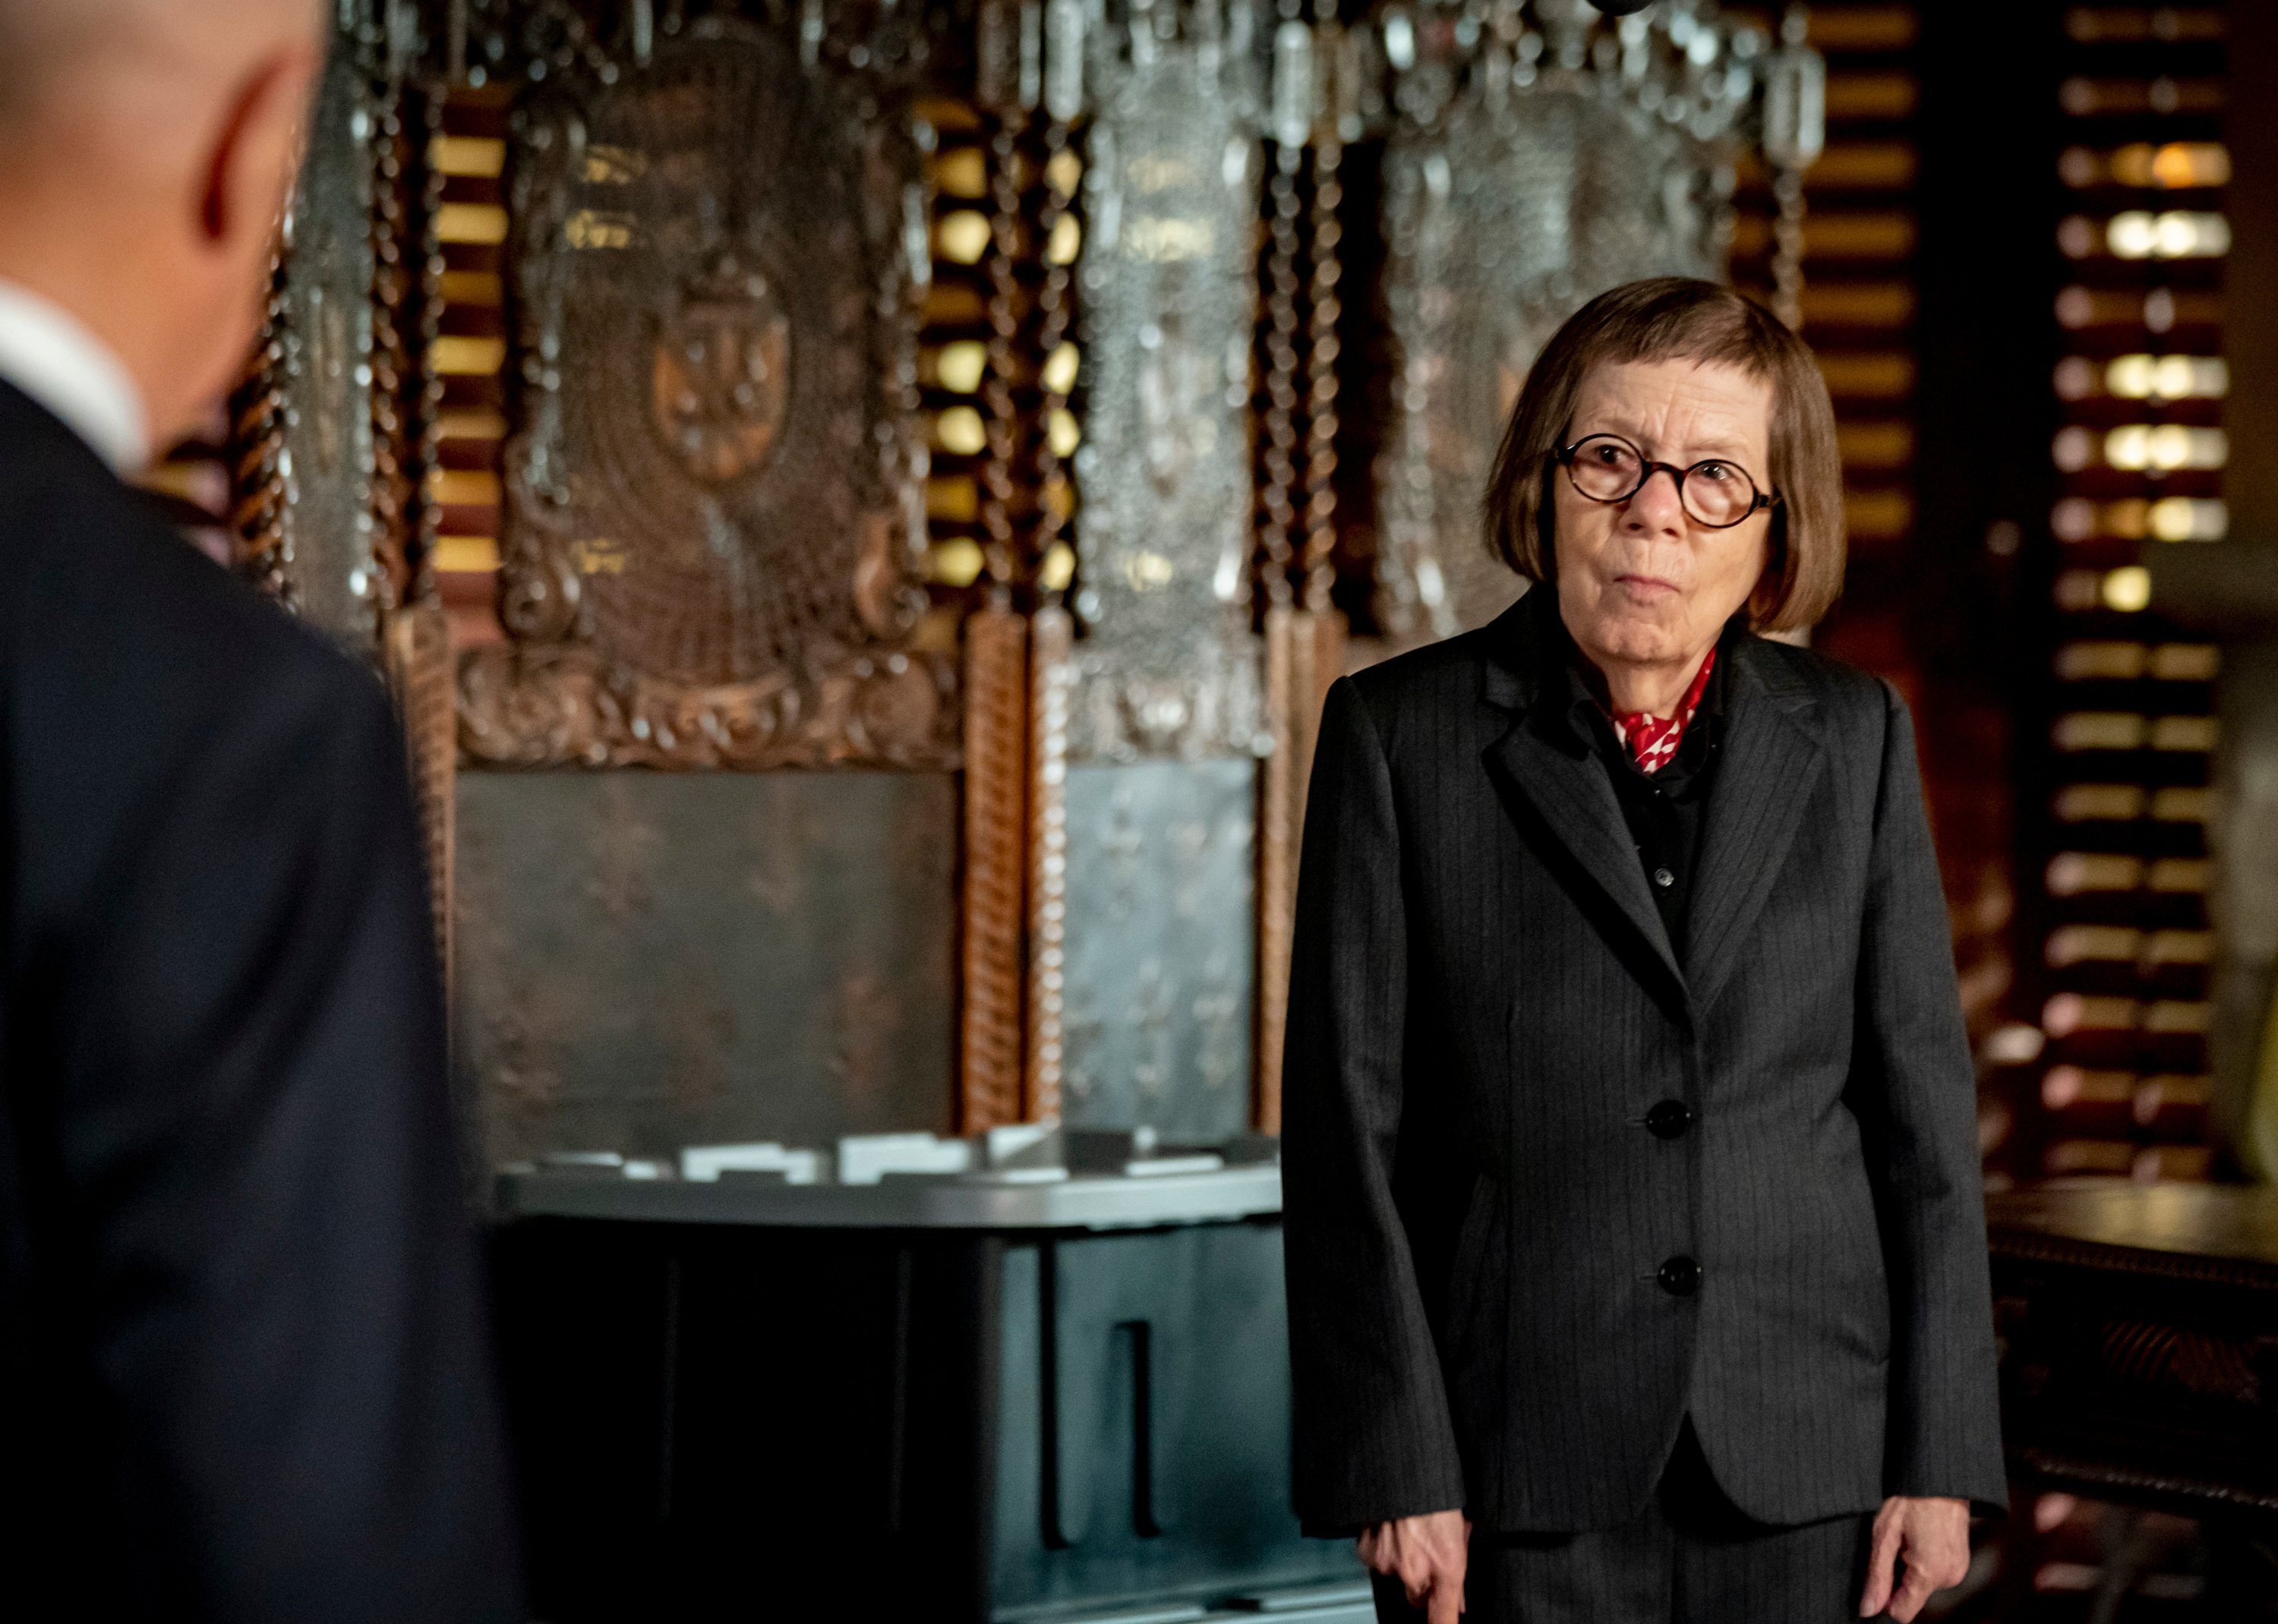 Linda Hunt wears a suit and stands in her office, looking concerned.